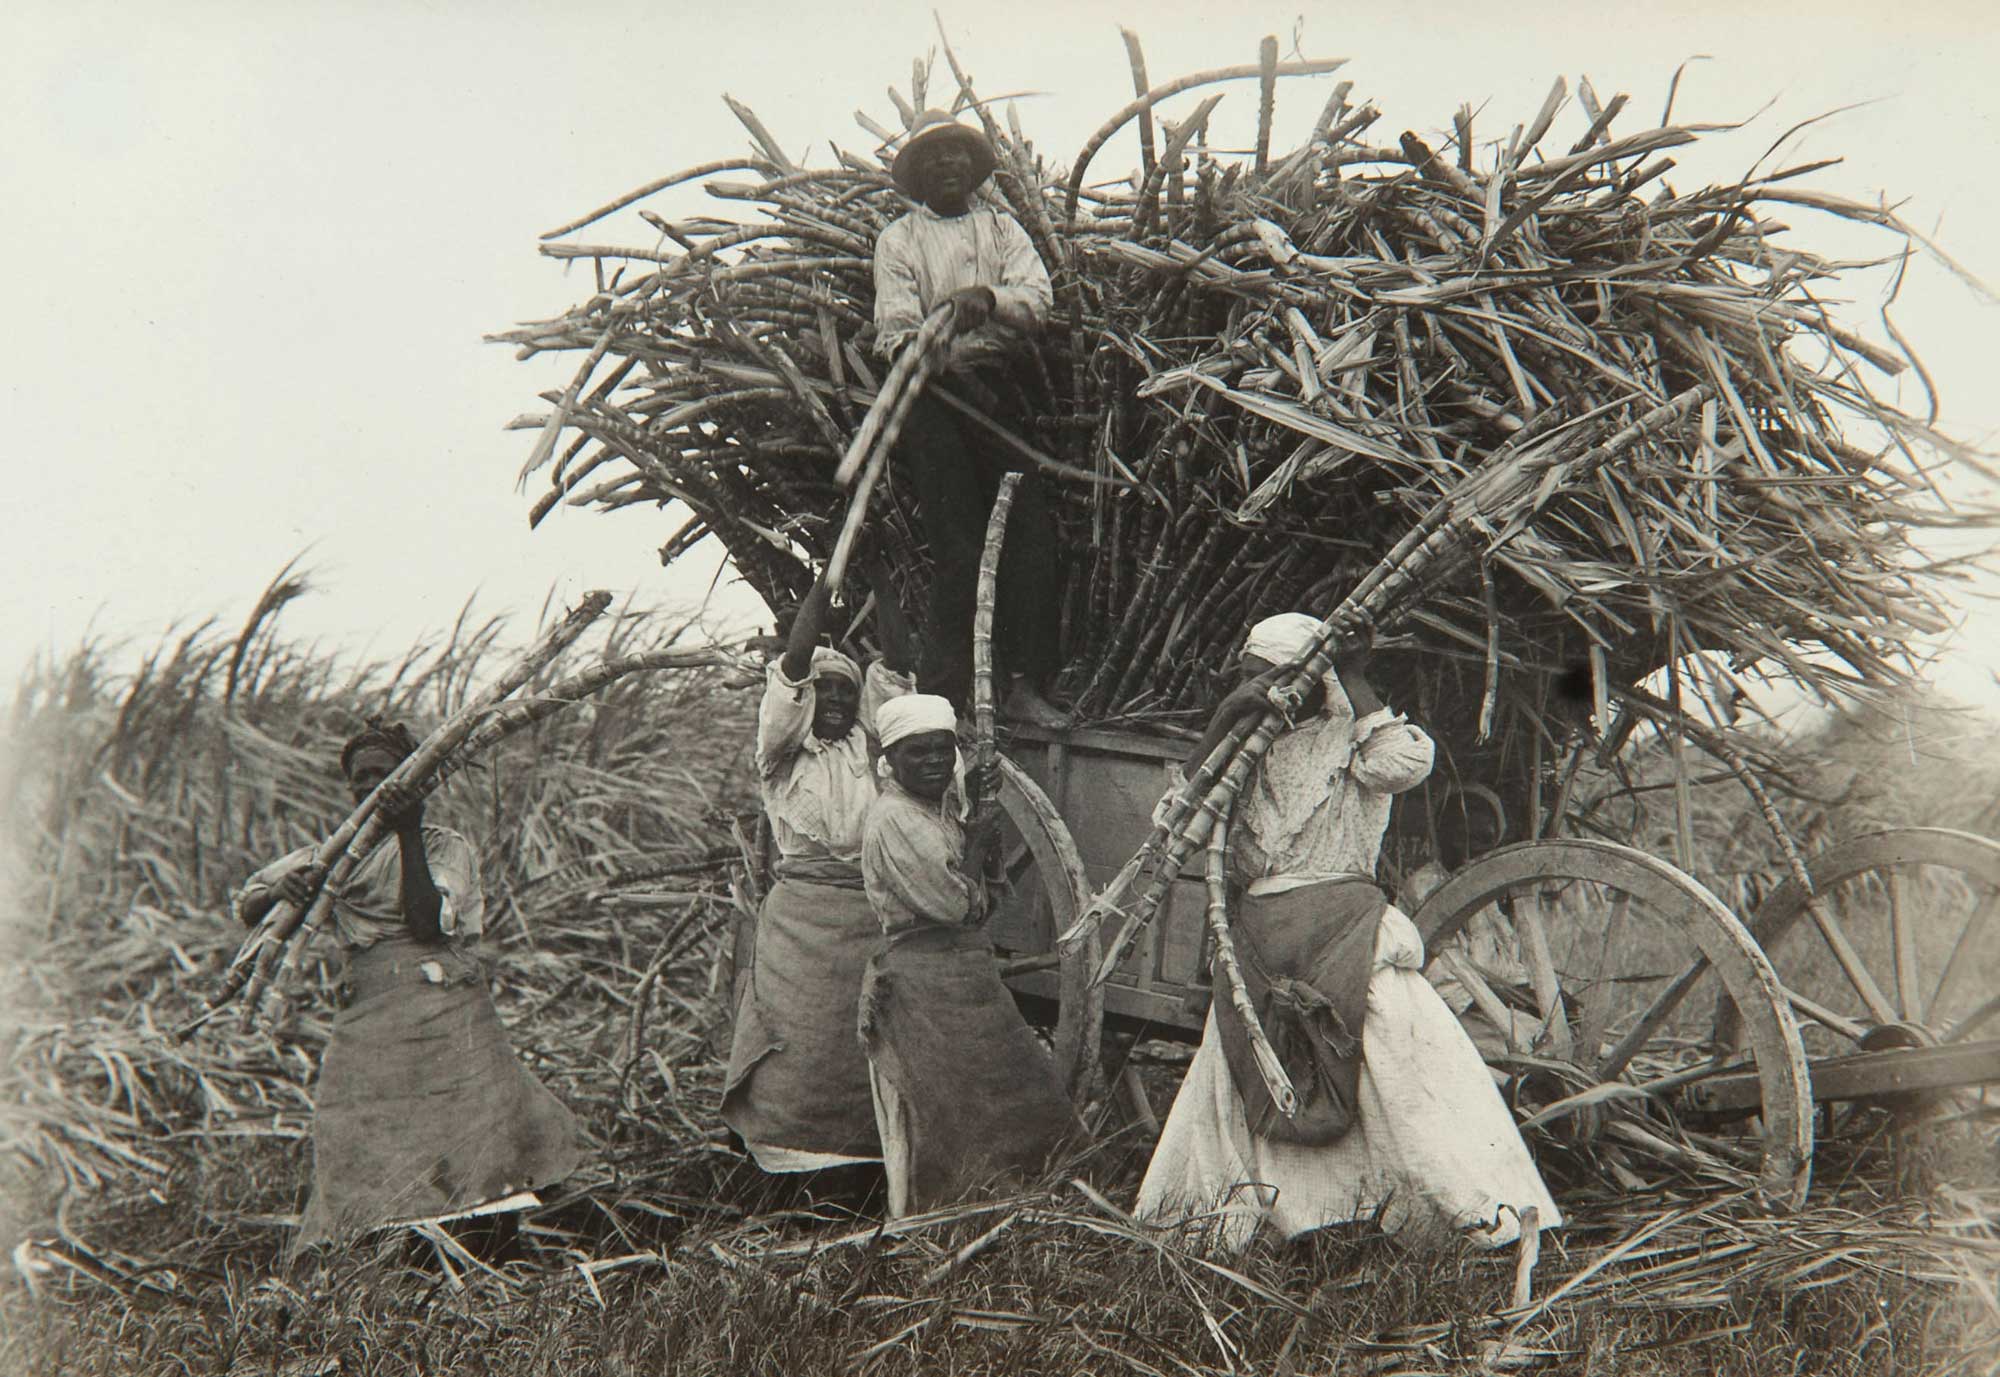 Black and white photograph of people loading sugarcane for transport on Barbados in 1914. The photo shows a man standing on the side of a wooden wagon filled with sugarcane stalks.  Four women stand on the ground, each holding one or several sugarcane stalks. The women are handing the stalks to the man, who appears to be placing them on the wagon.